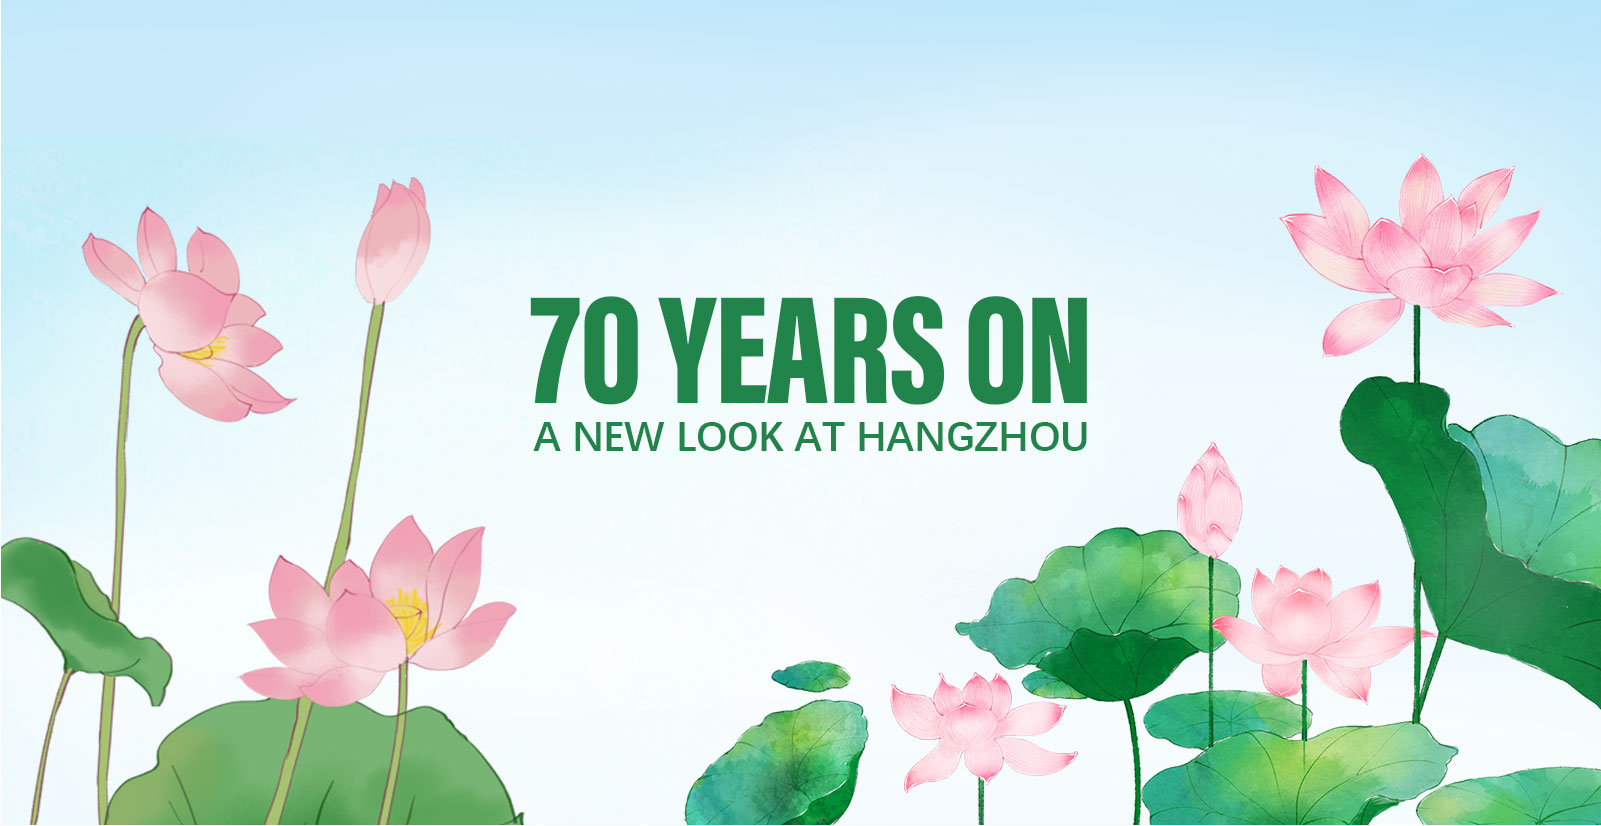 70 Years on: A new look at Hangzhou